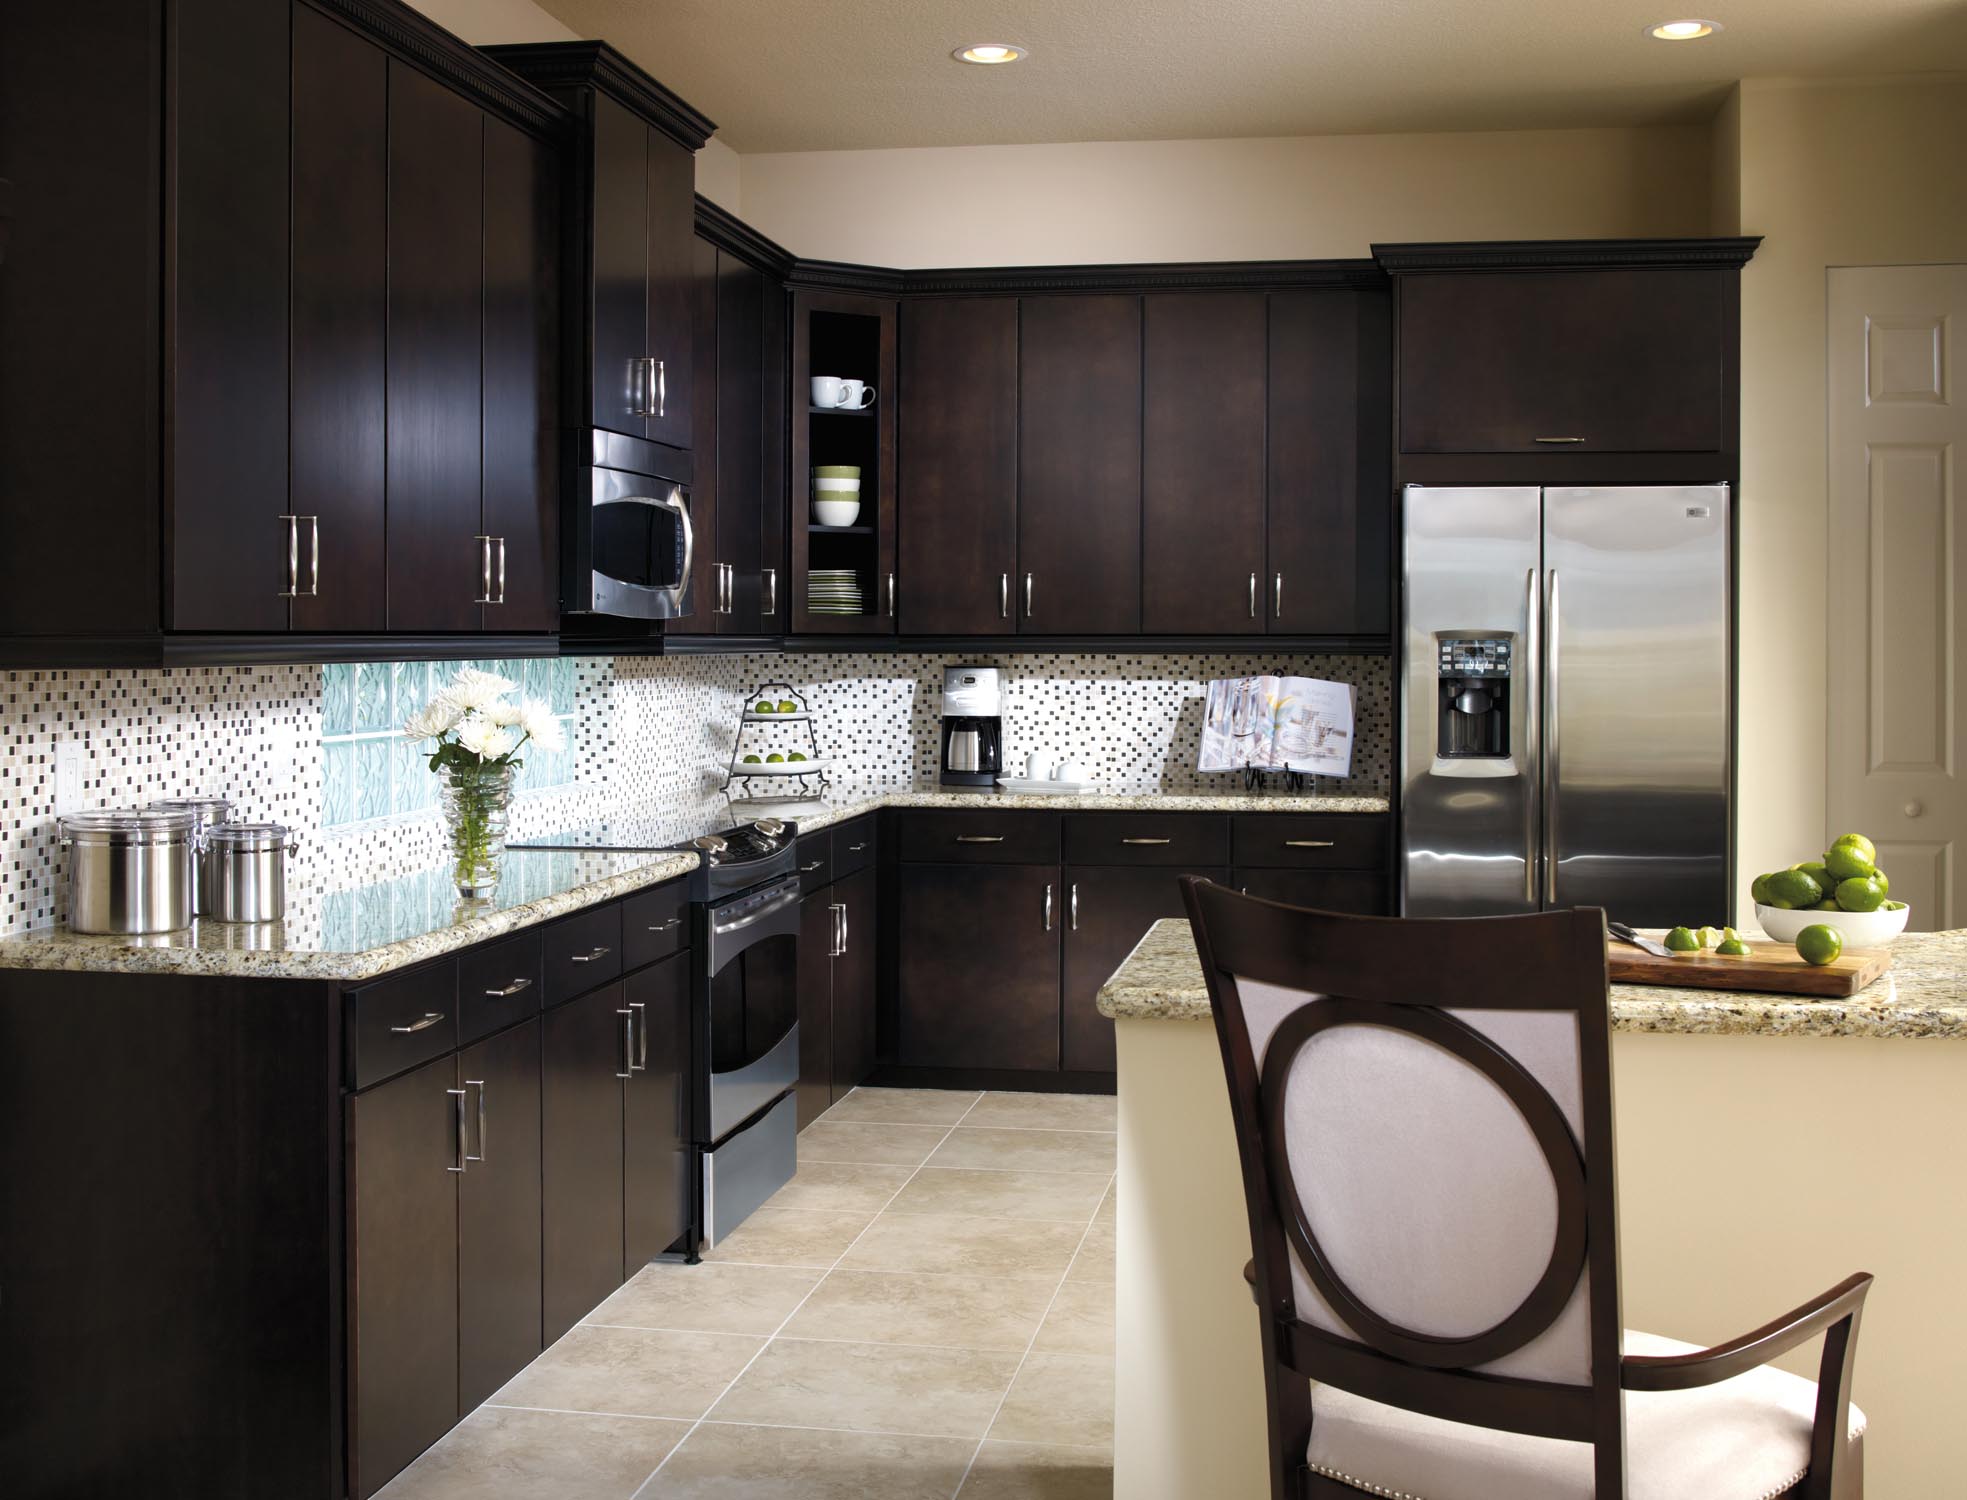 cabinetry for kitchen and bath